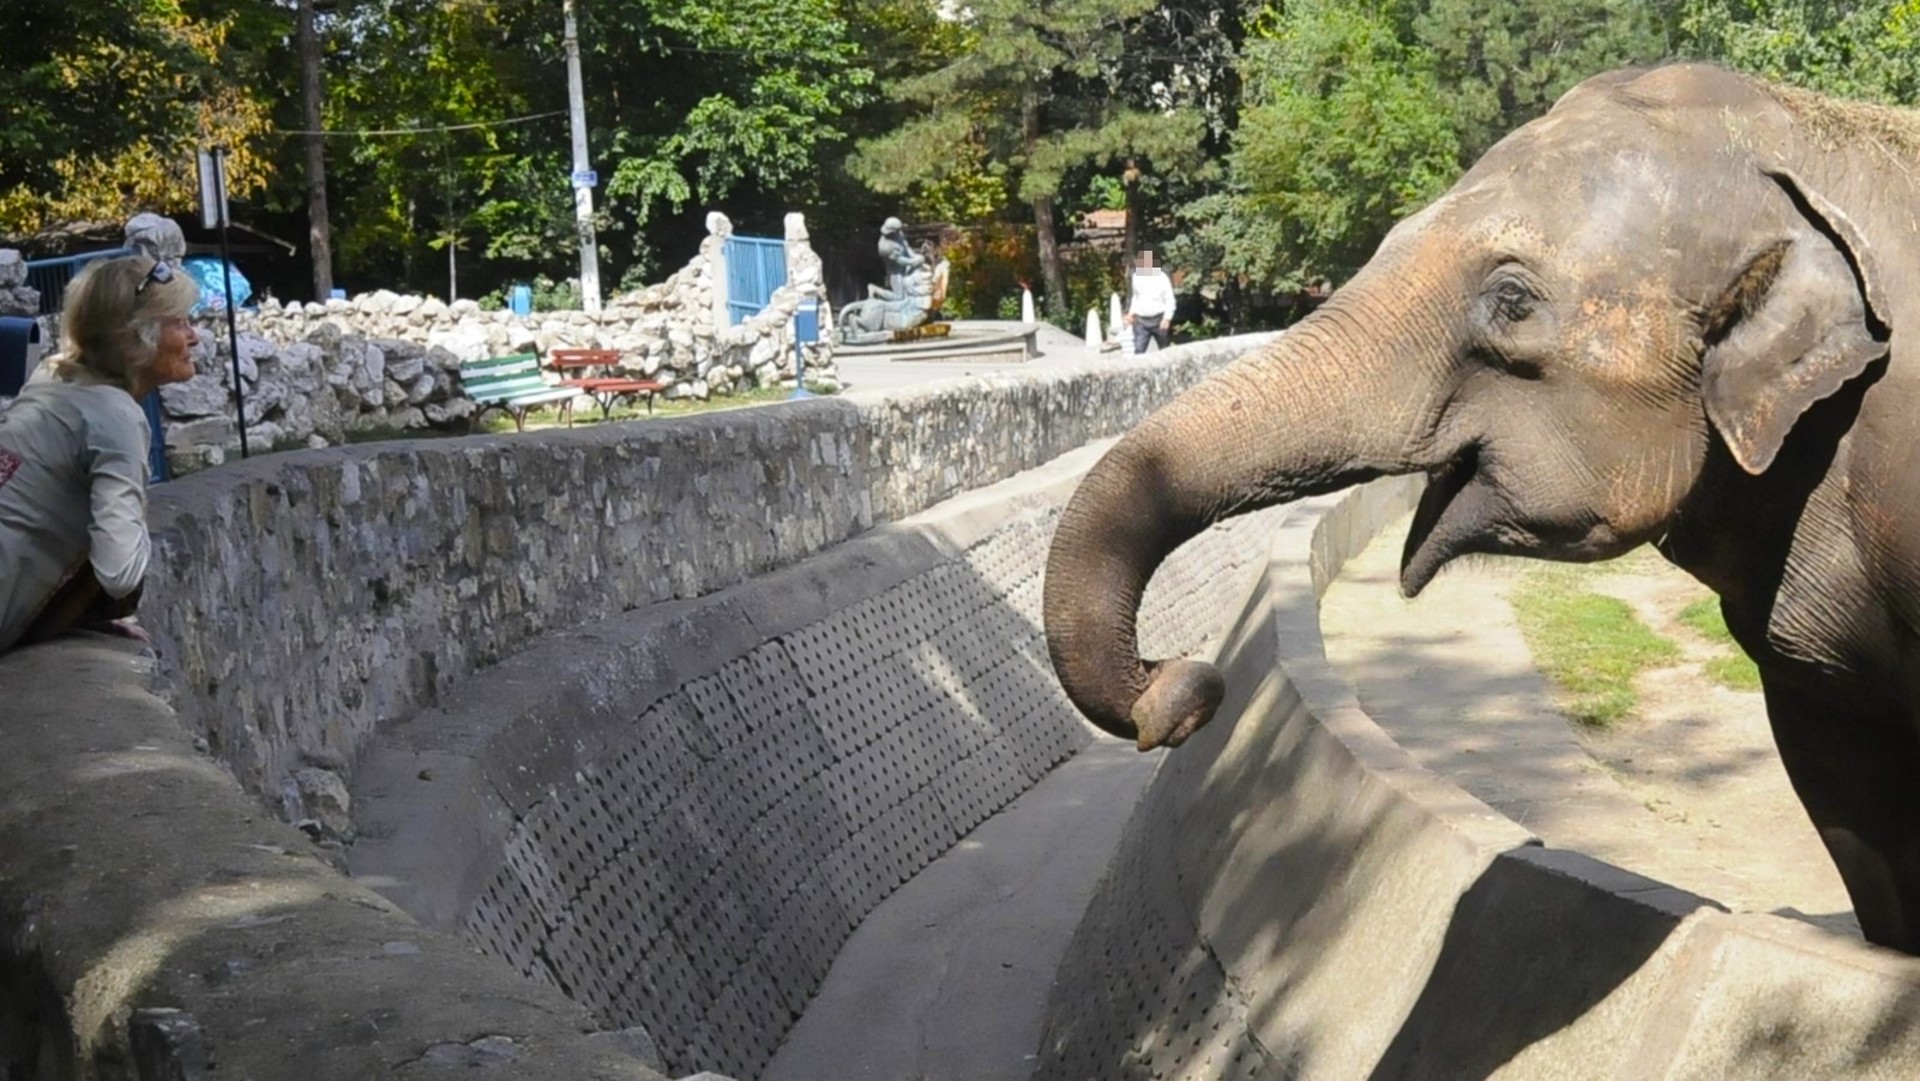 An elephant reaches out its trunk over the side of its enclosure, where people are standing